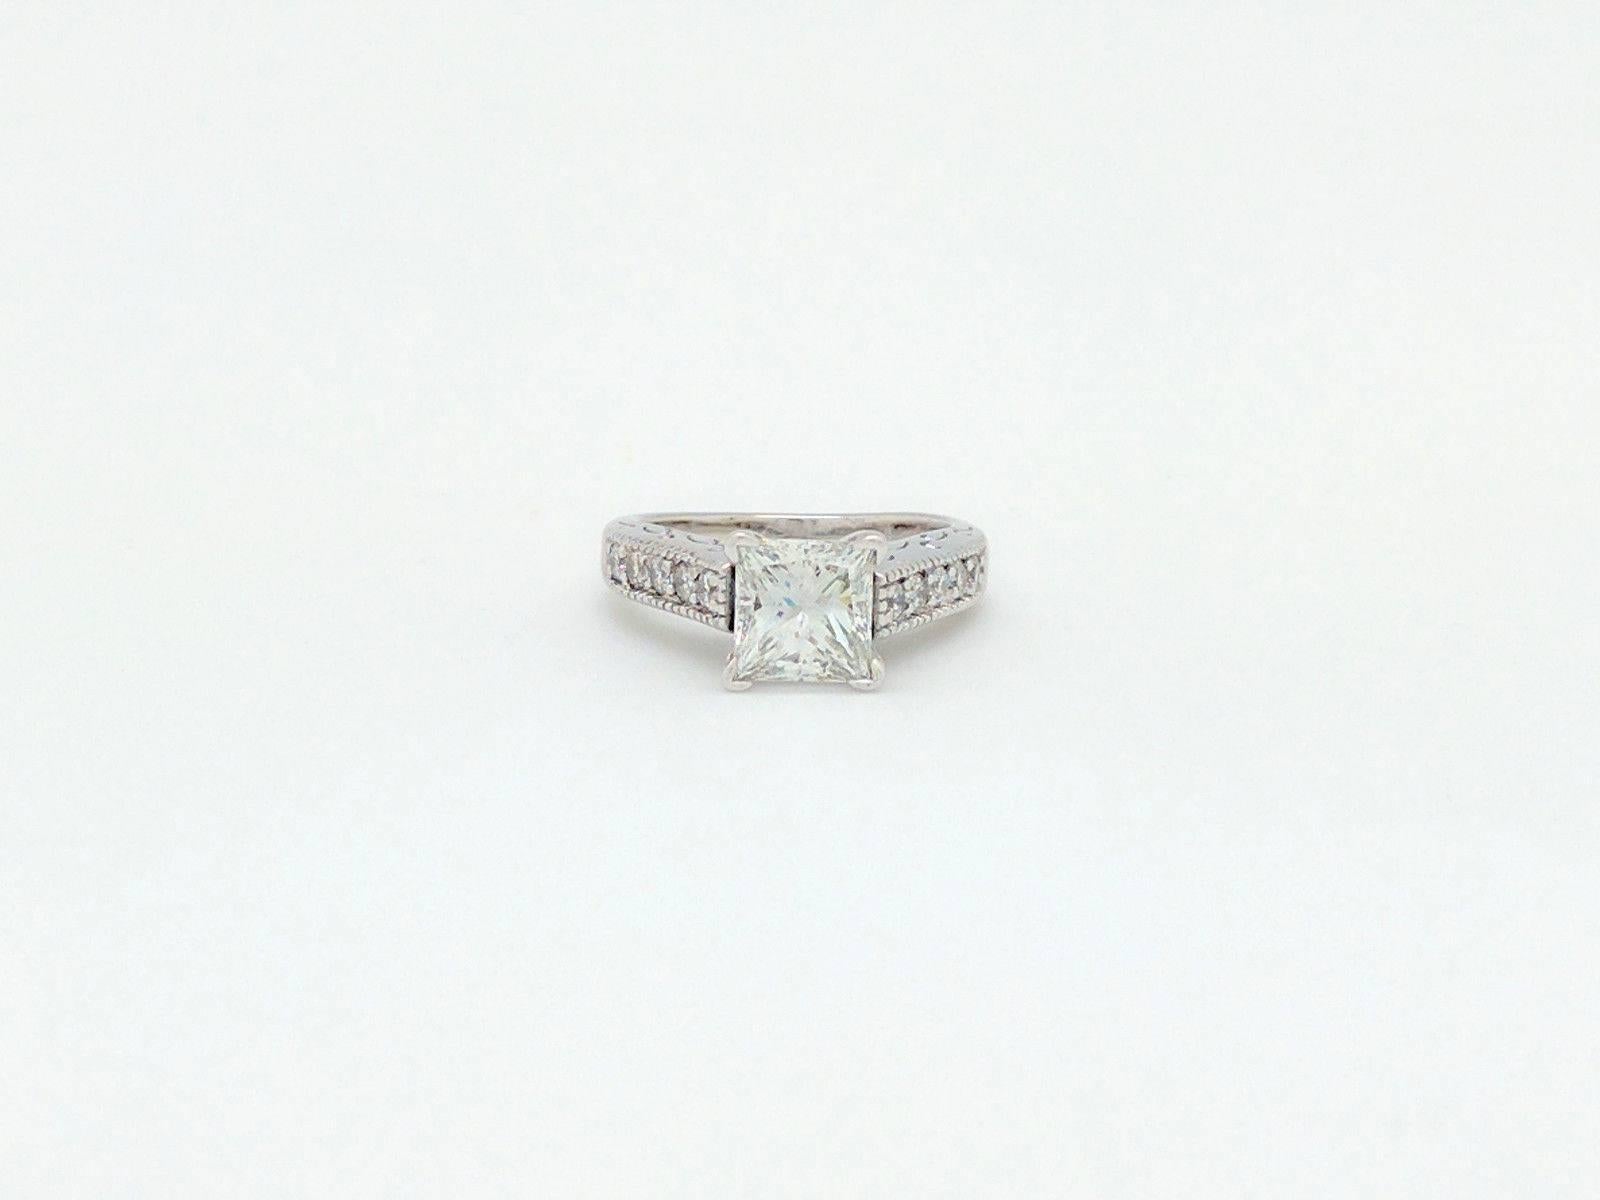 14K White Gold 1.85ct Princess Cut Diamond Engagement Ring VS2/H
 
You are viewing a beautiful 1.85ct natural princess cut diamond. We estimate this diamond to be VS2 in clarity and H in color. The diamond is beautifully displayed in a